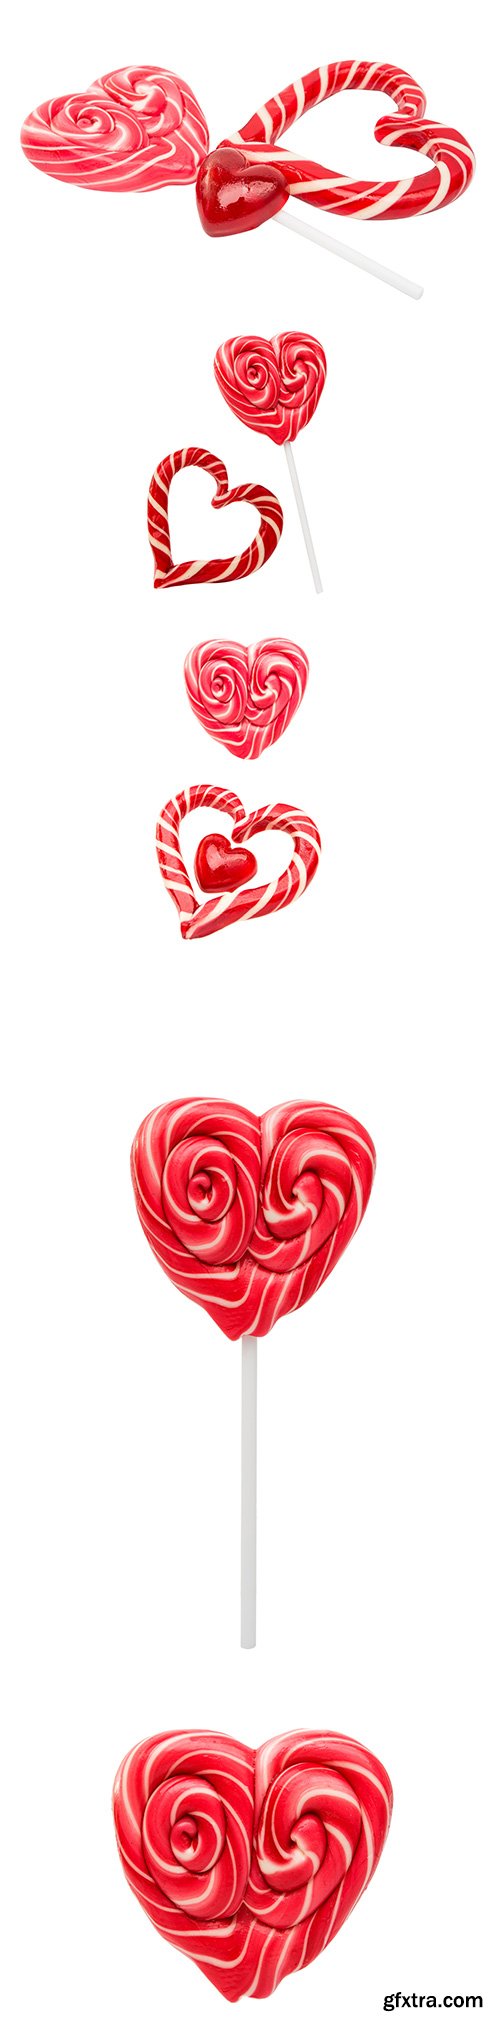 Candy Heart Isolated - 7xJPGs